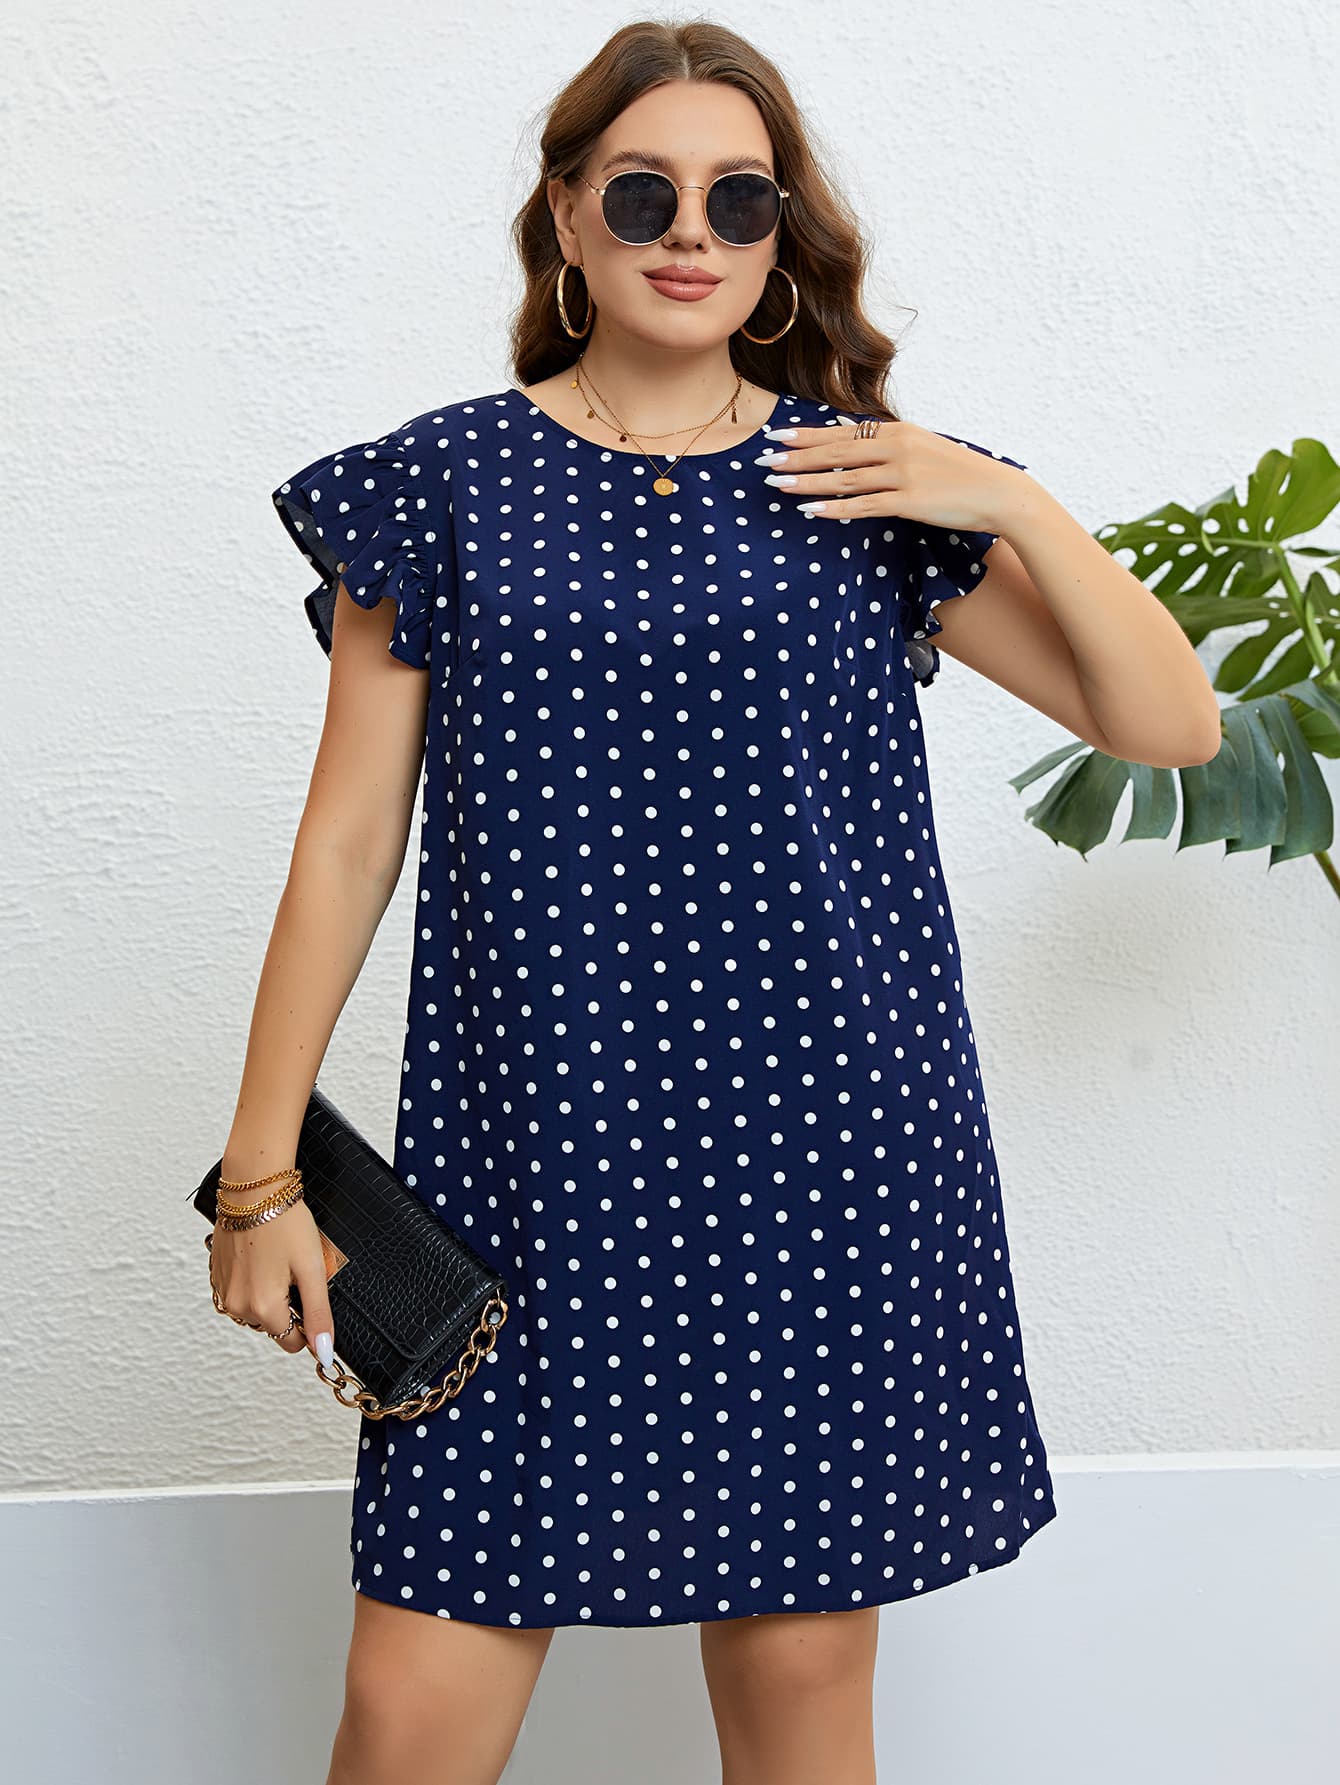 Dress In Style Polka Dots